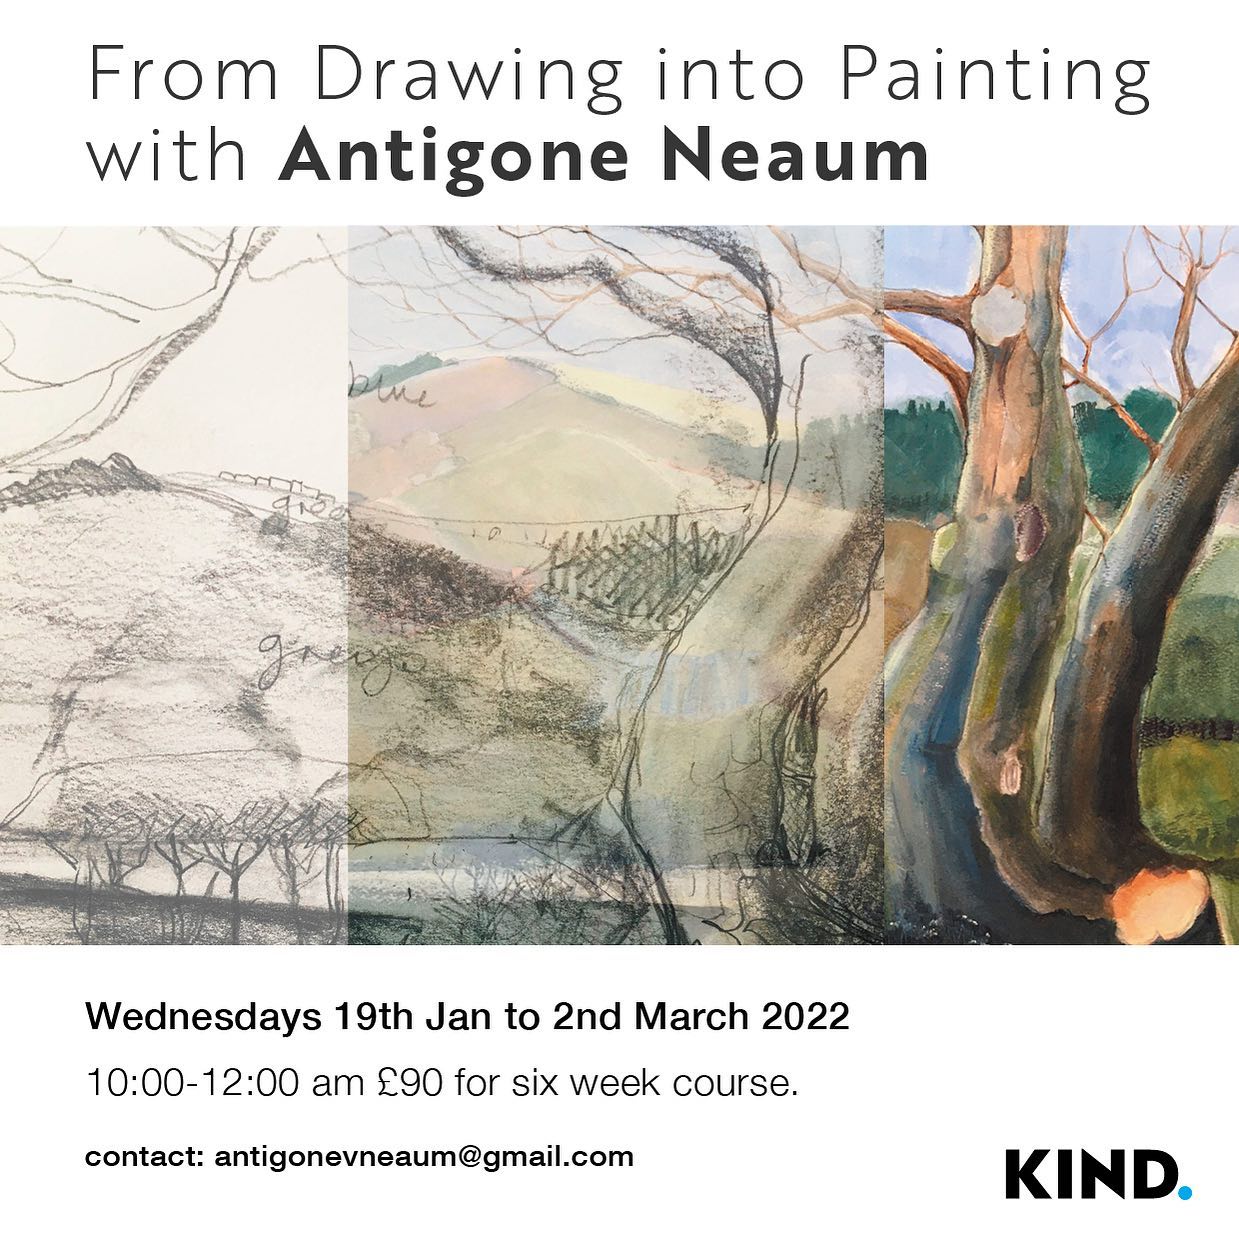 From Drwaing to Painting with Antigone Neaum